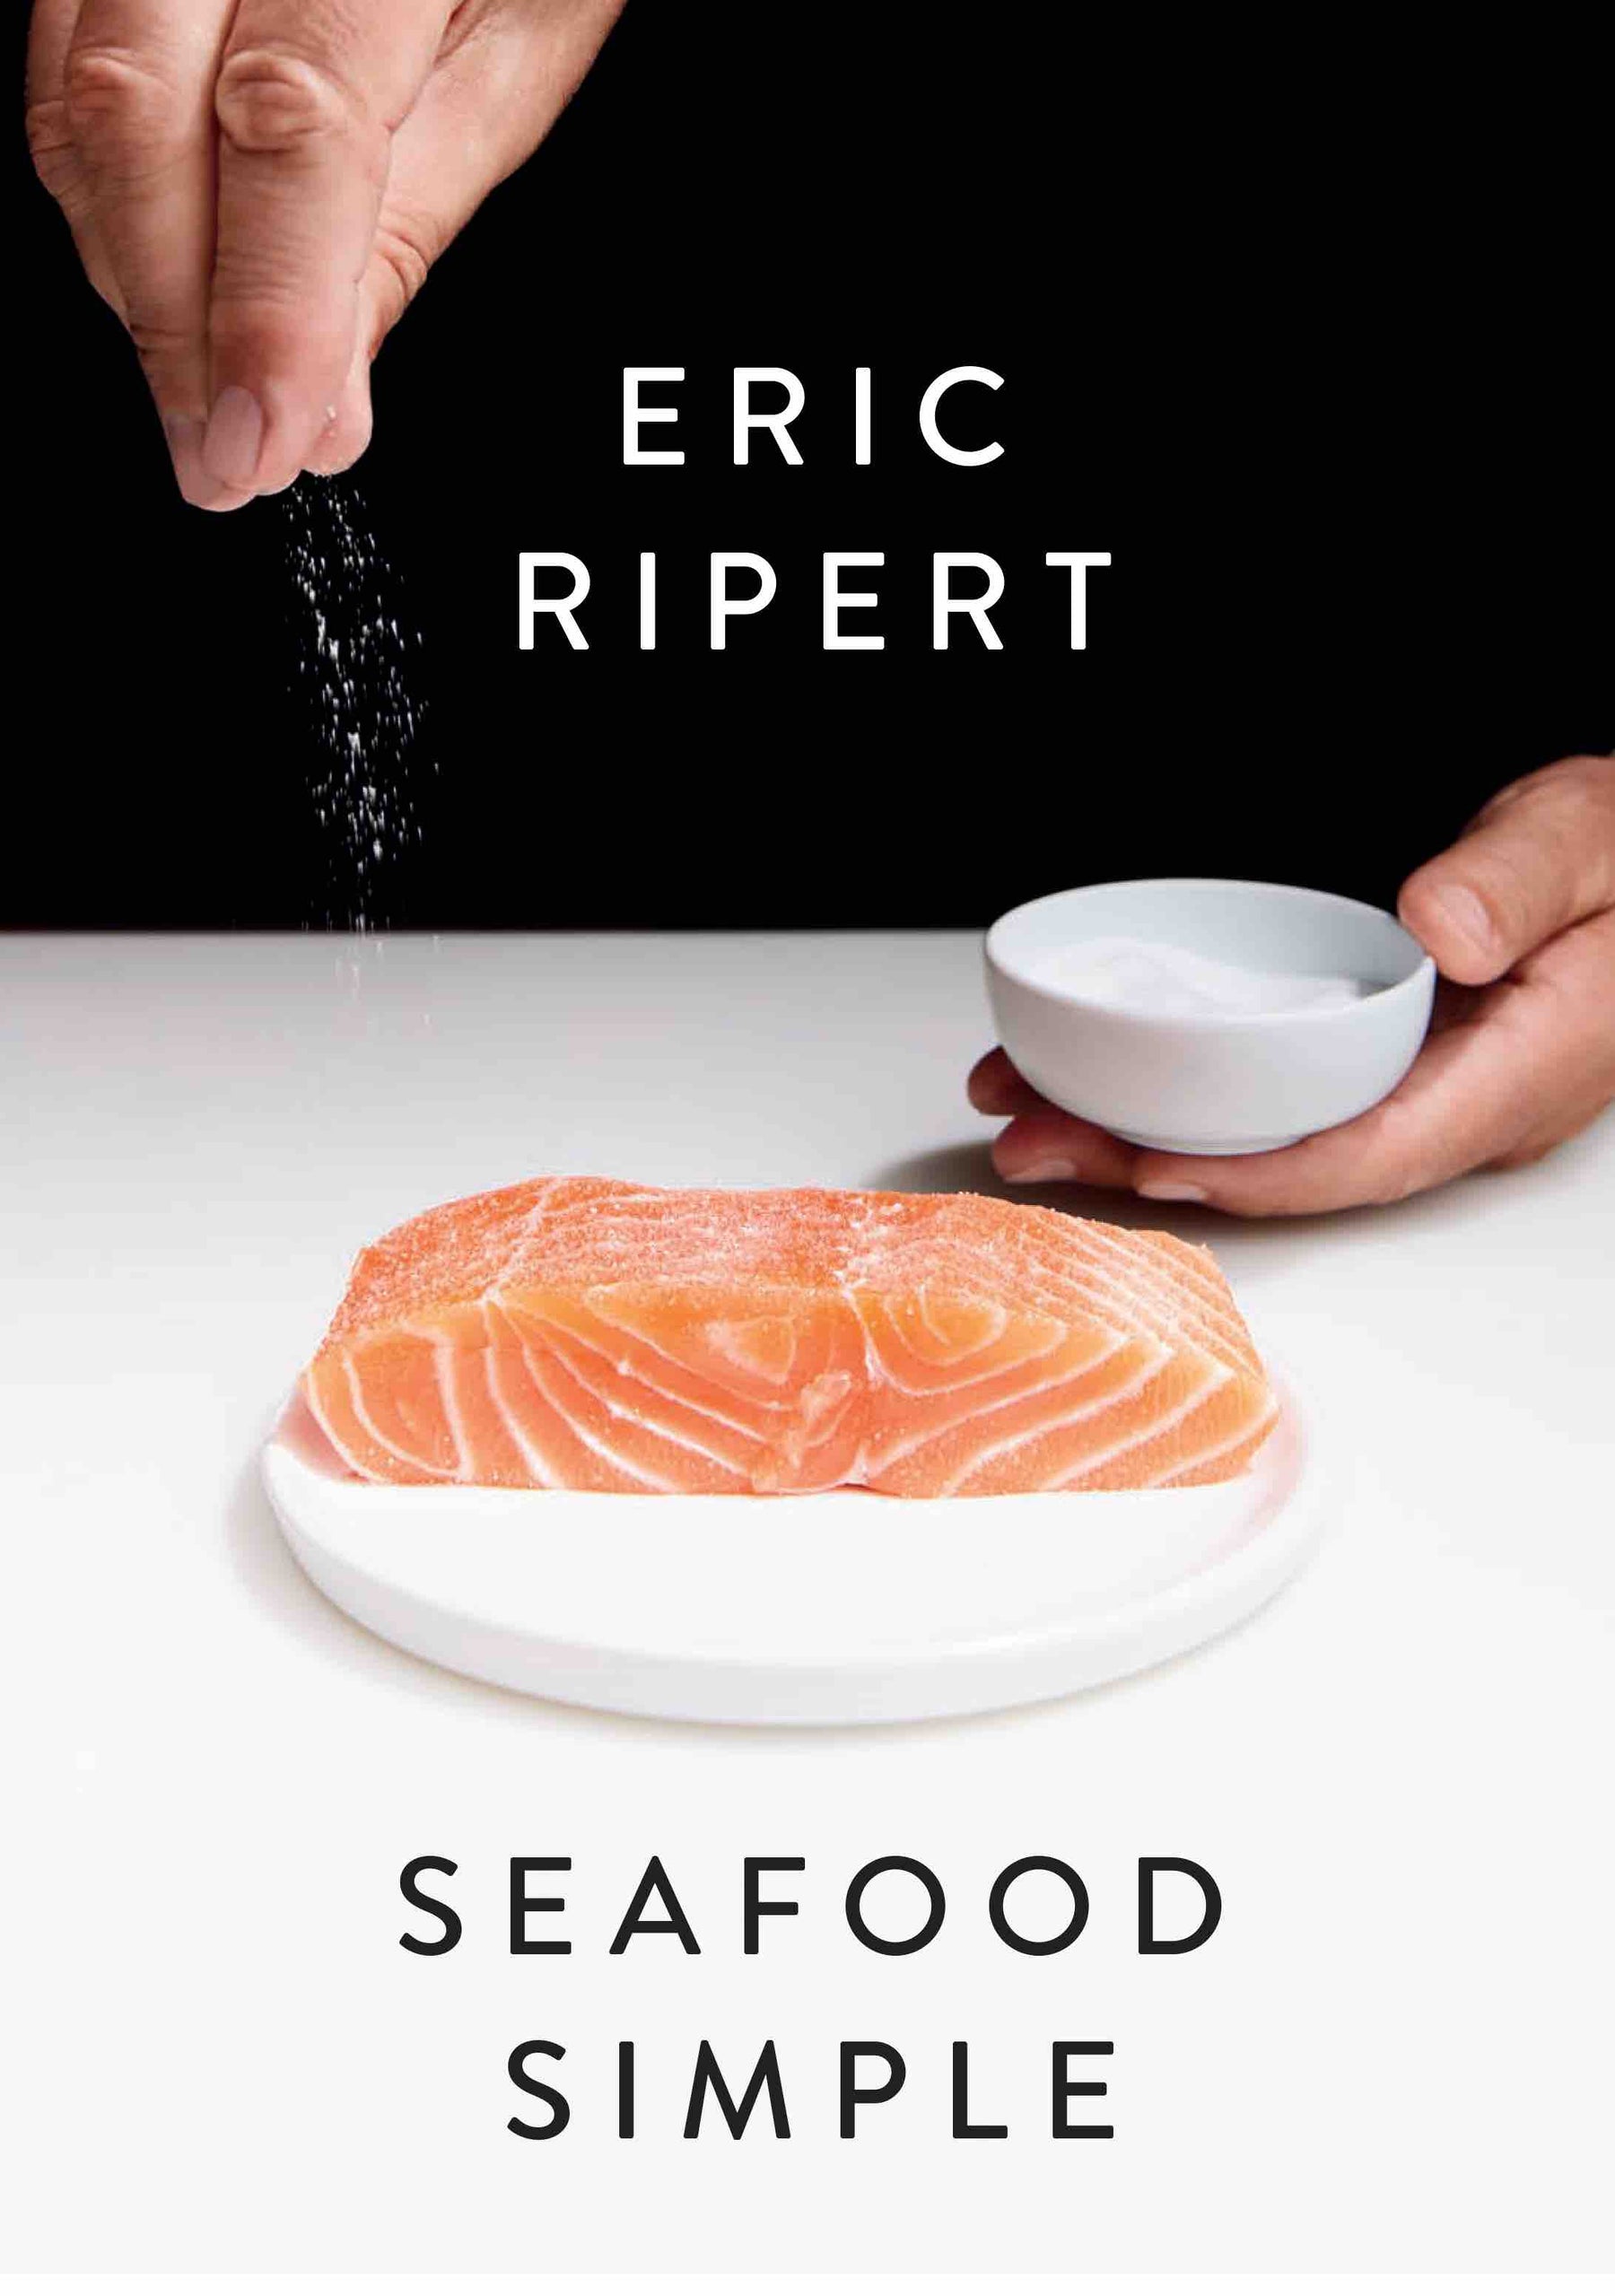 Seafood Simple: A Cookbook | by Eric Ripert - Random House - Bluecashew Kitchen Homestead